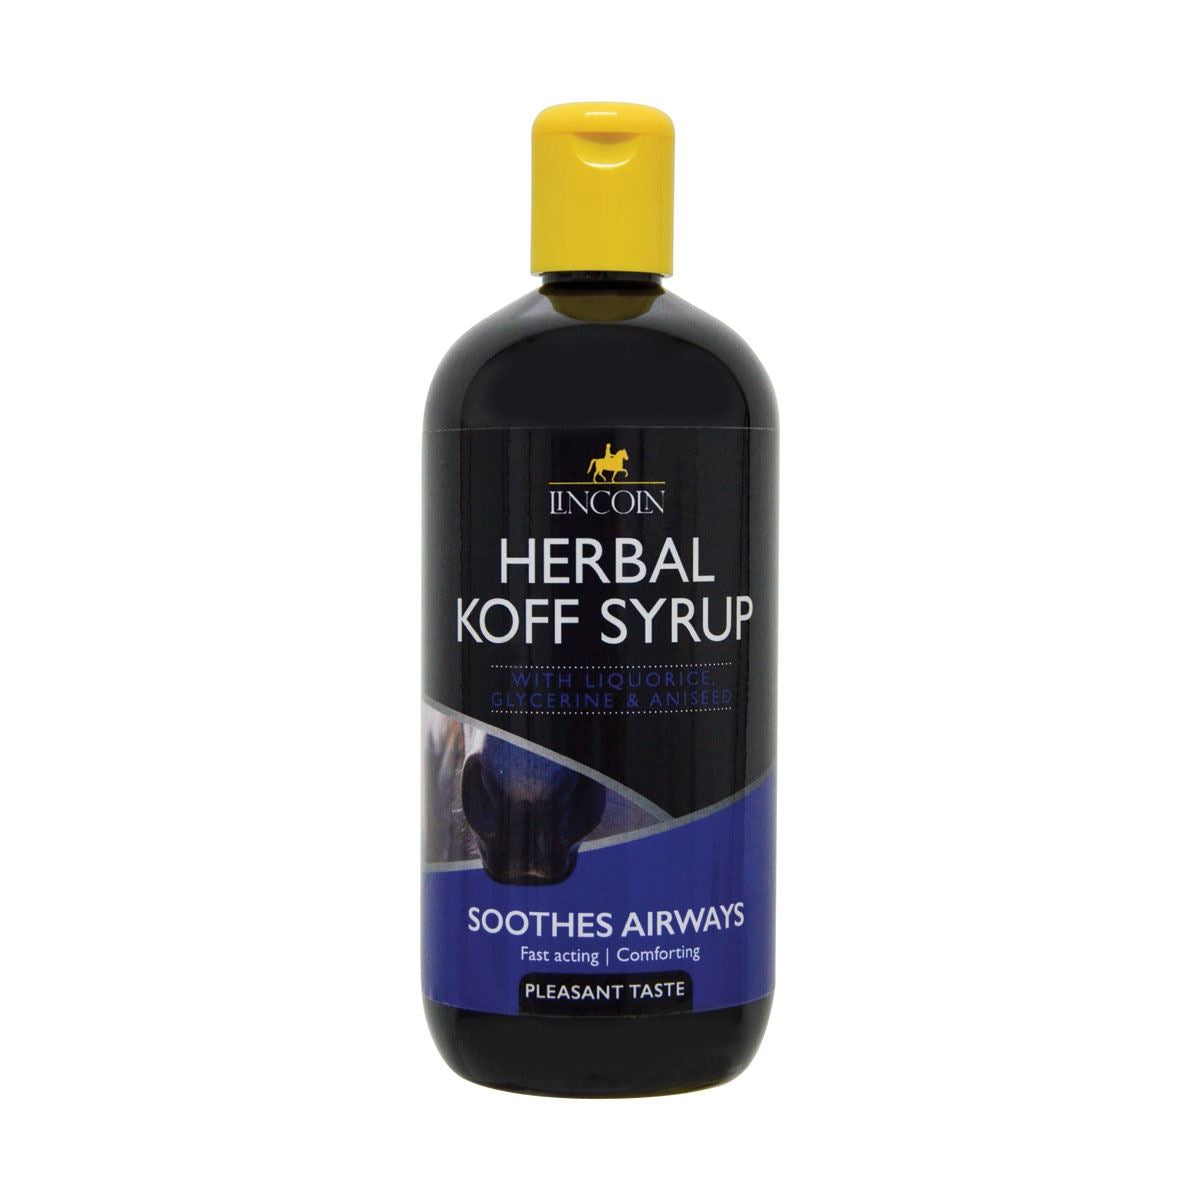 Lincoln Herbal Koff Syrup - Just Horse Riders